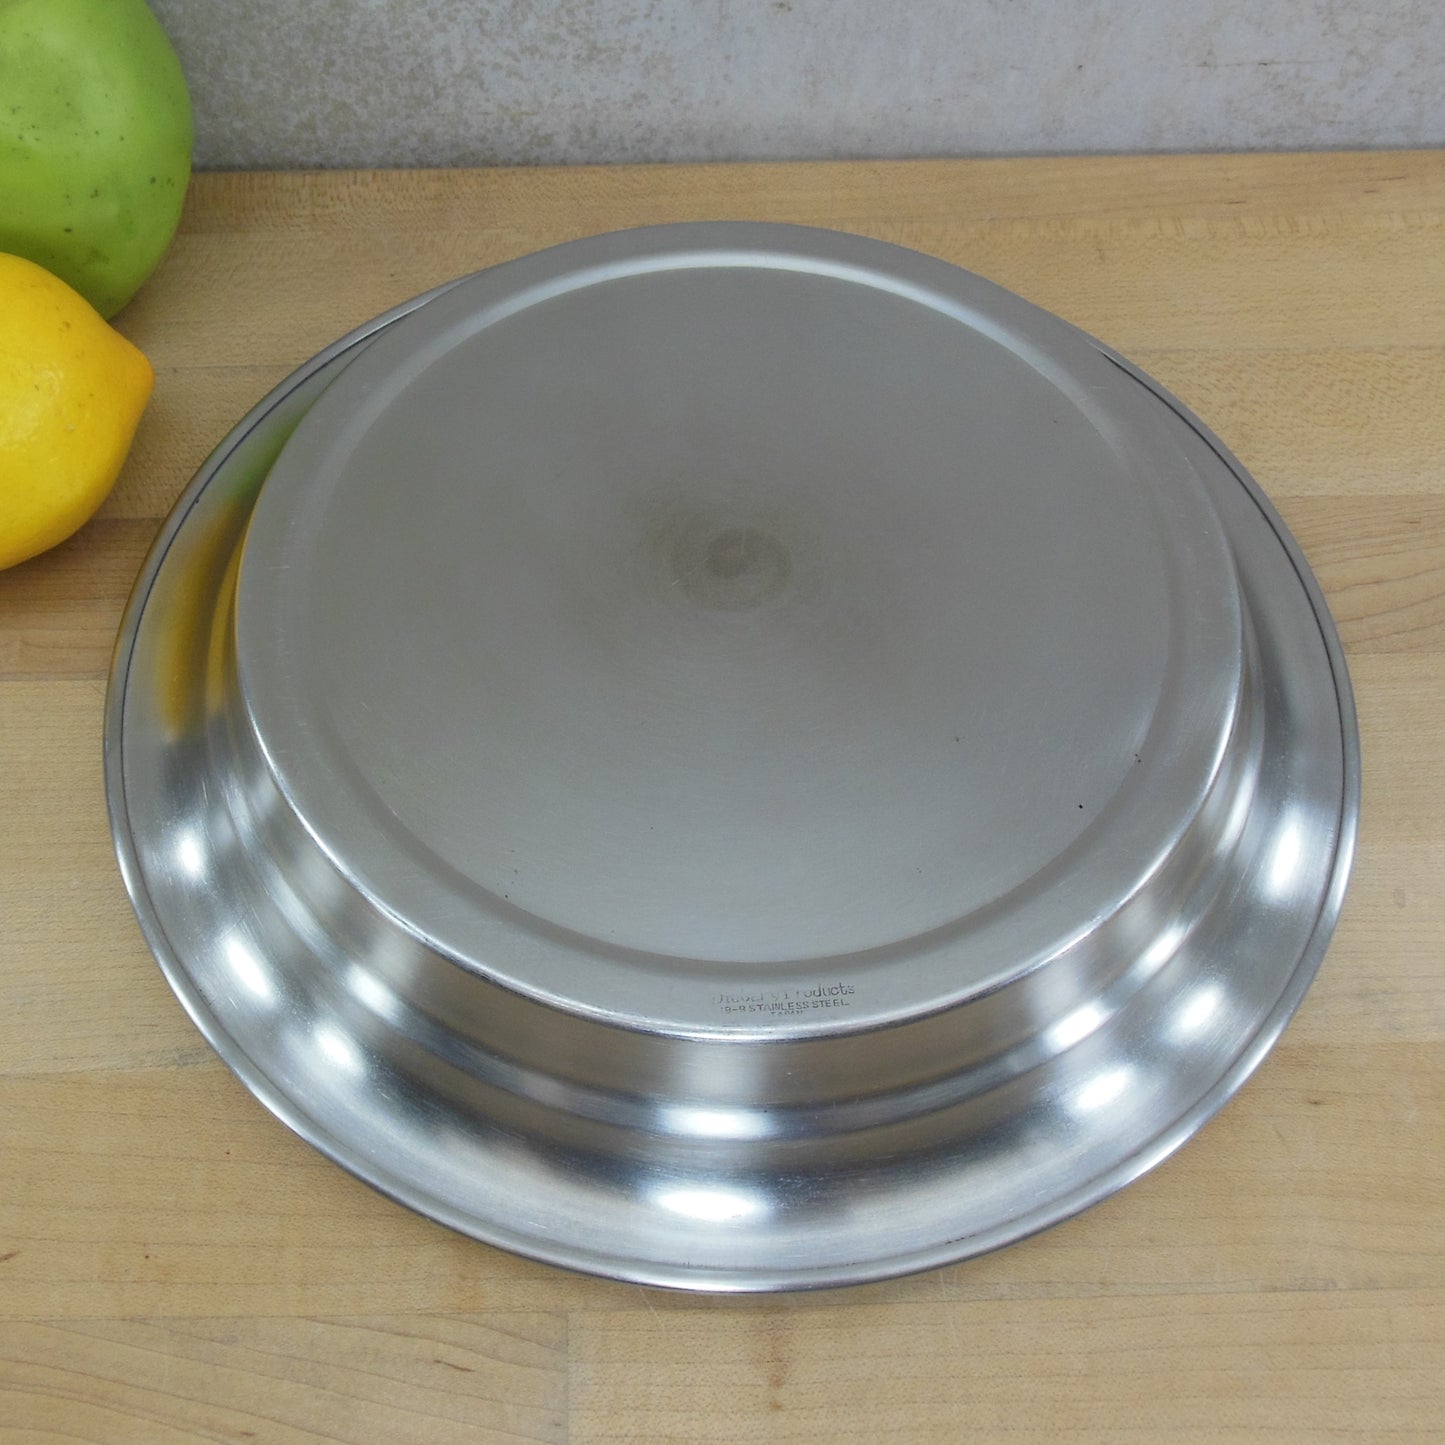 Dietary Products Japan 18-8 Insulated Stainless Steel 9" Pie Pan Dish Commercial Baker